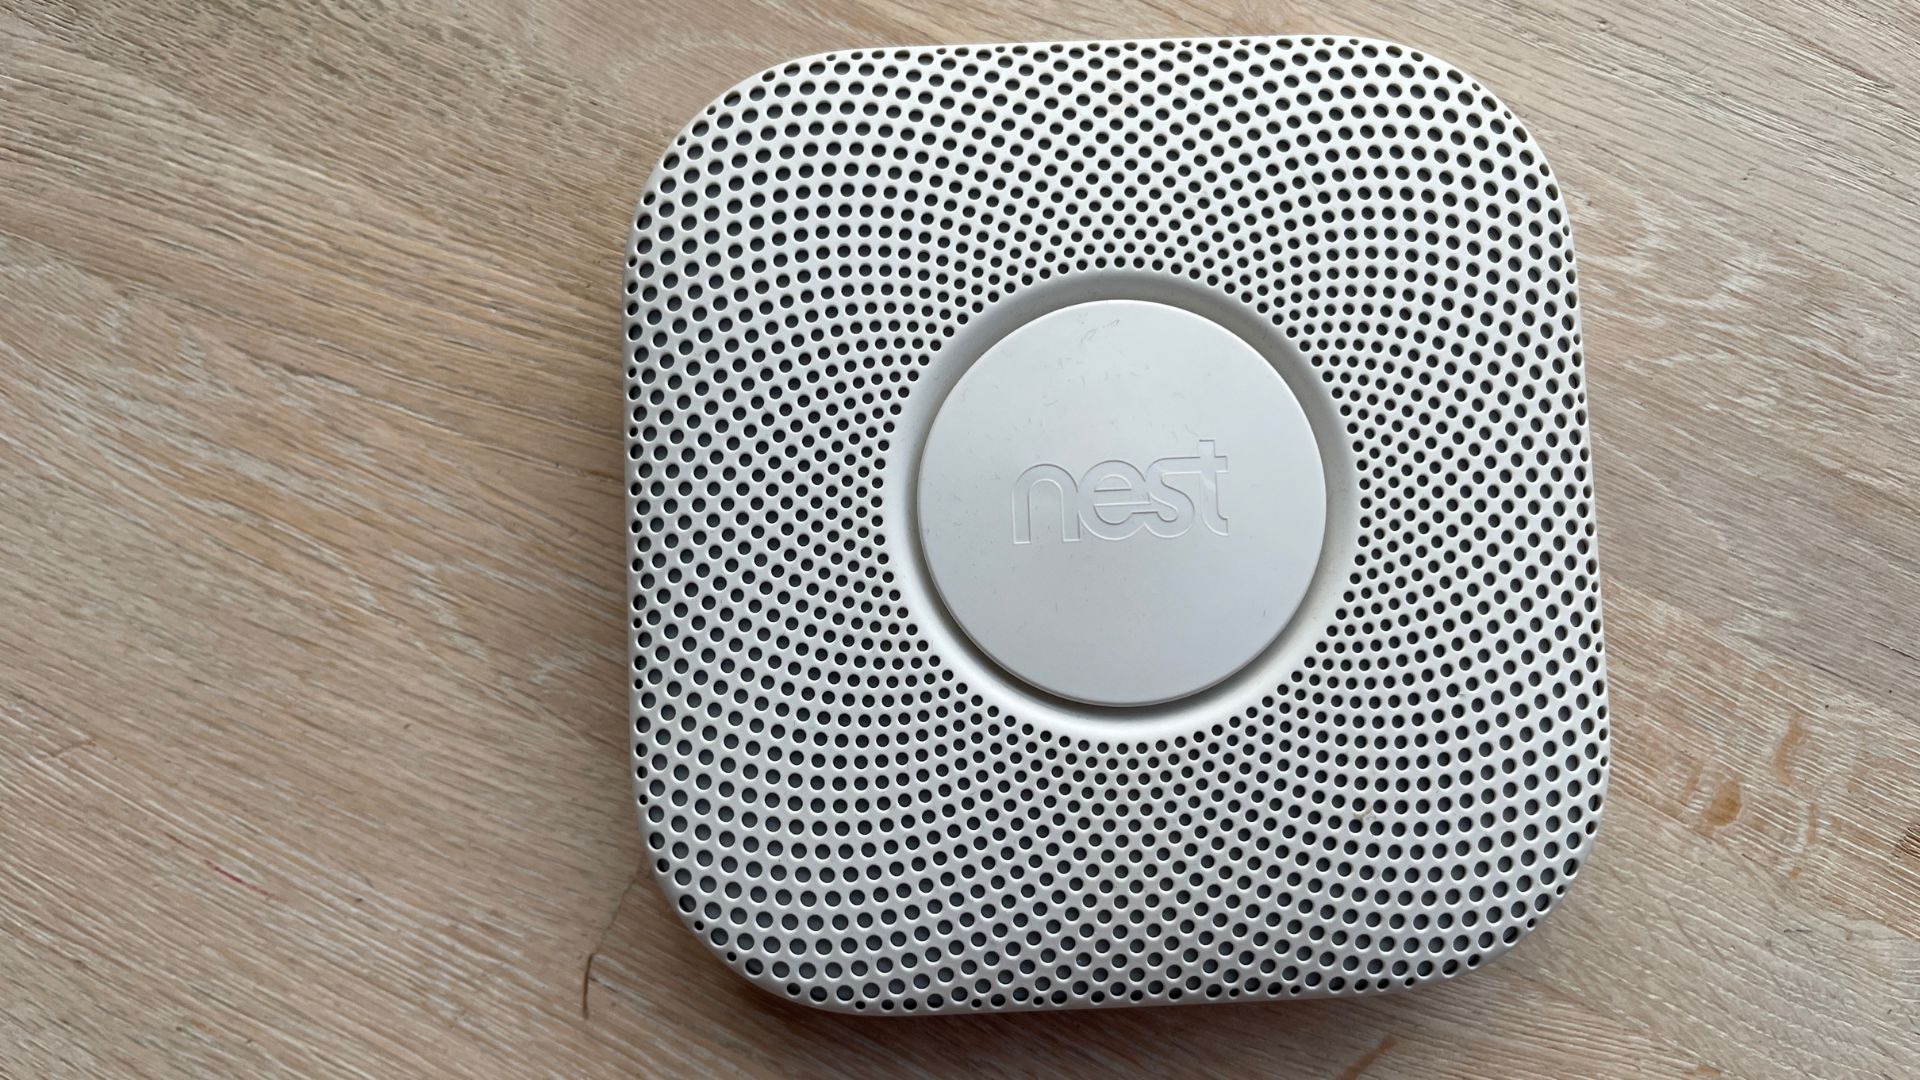 Nest Protect 2nd Gen